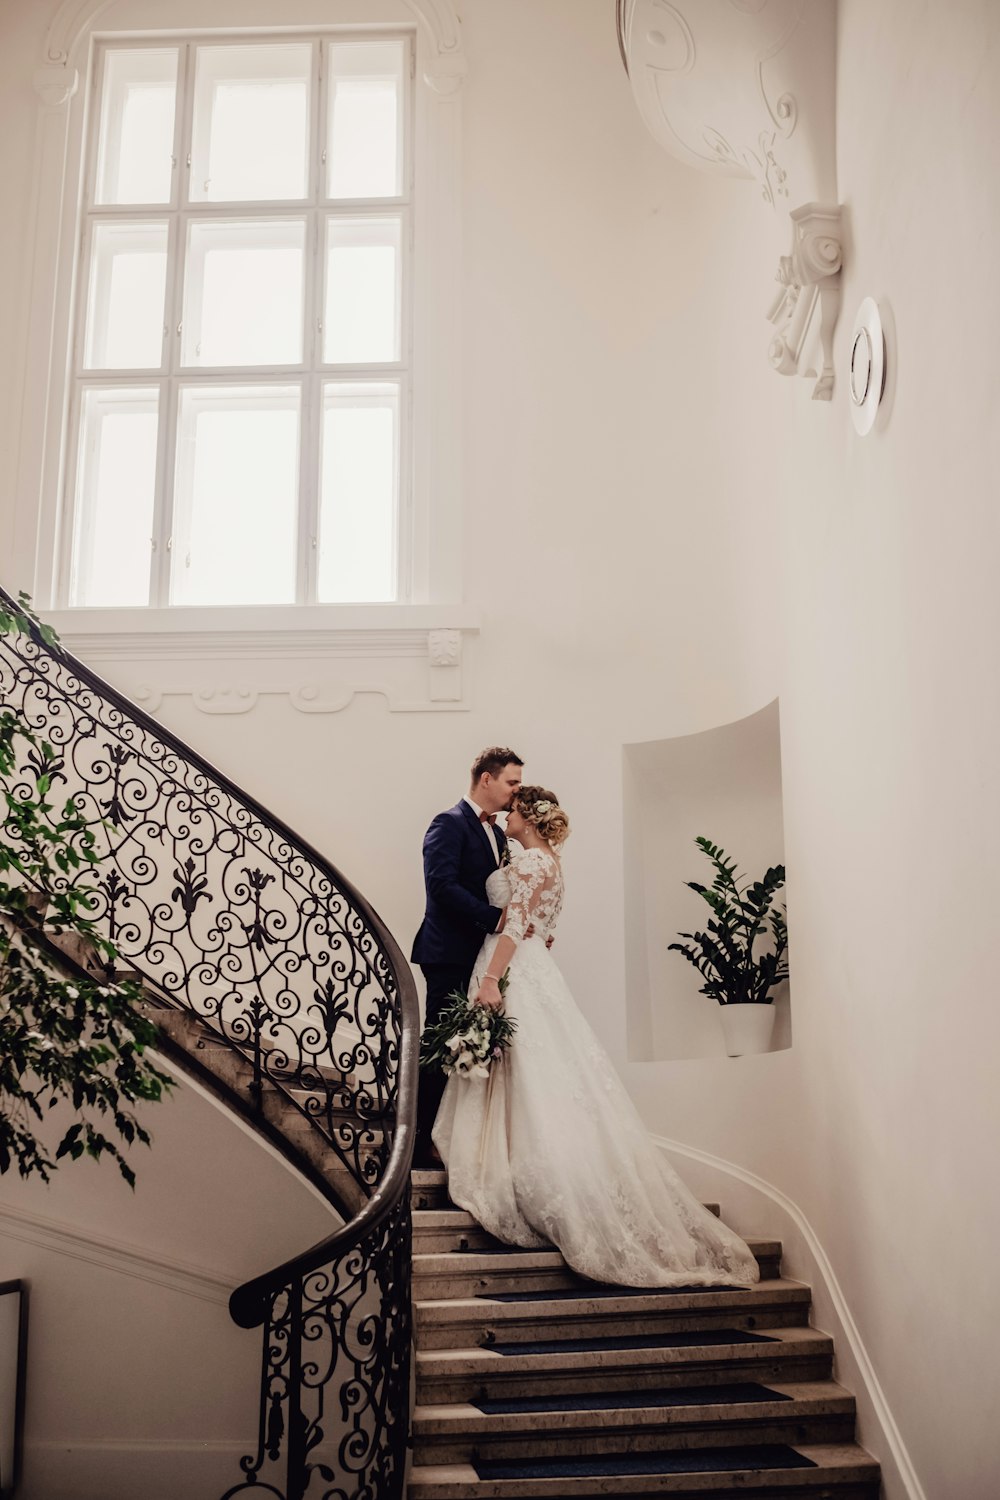 999+ Bride And Groom Pictures | Download Free Images On Unsplash